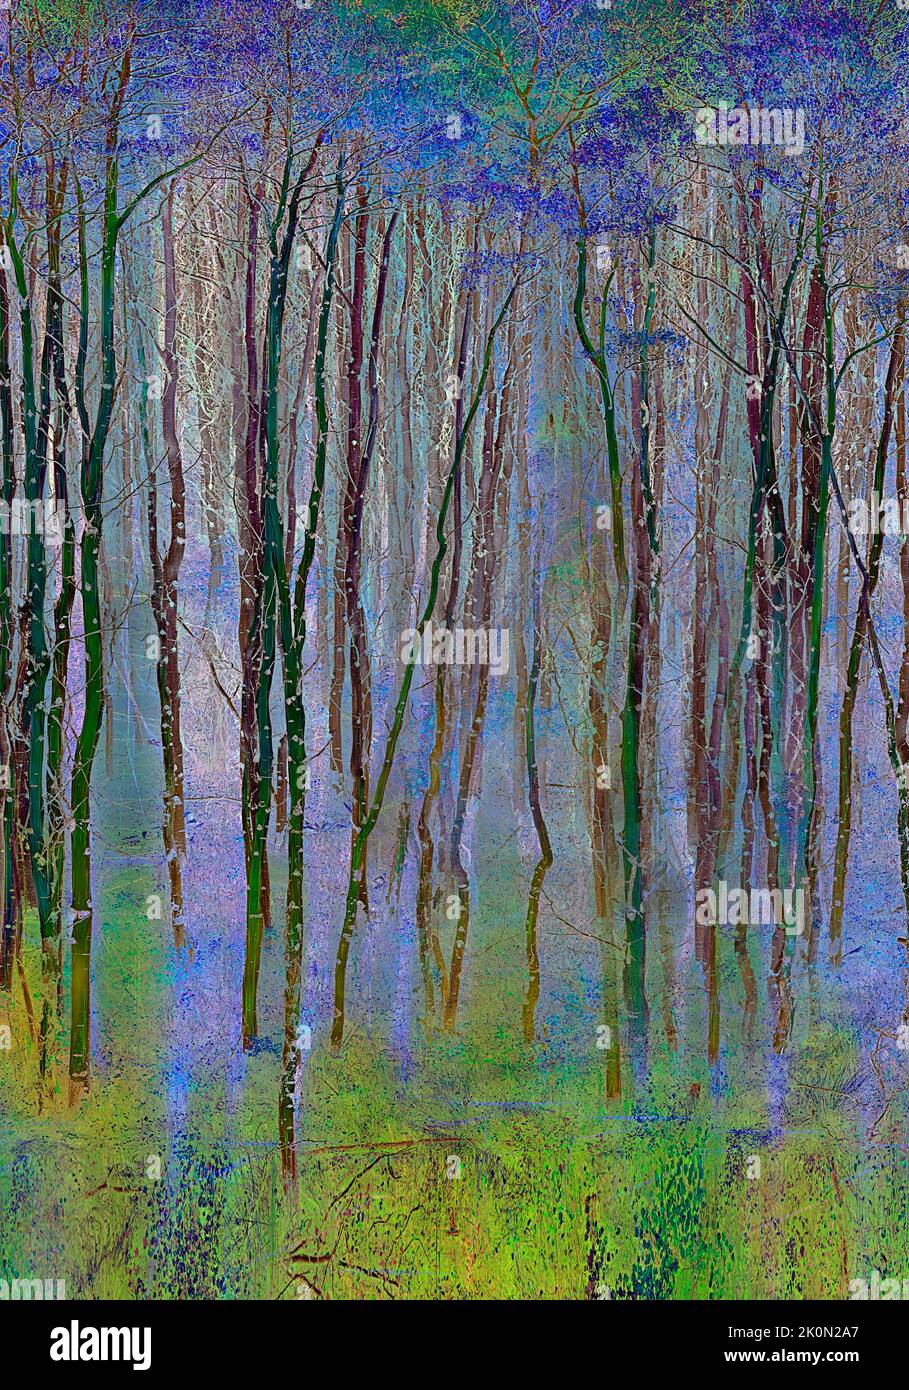 CONTEMPORARY ART: Magical forest in the Loisach Moor, Oberbayern, Germany by Edmund Nagele F.R.P.S. Stock Photo